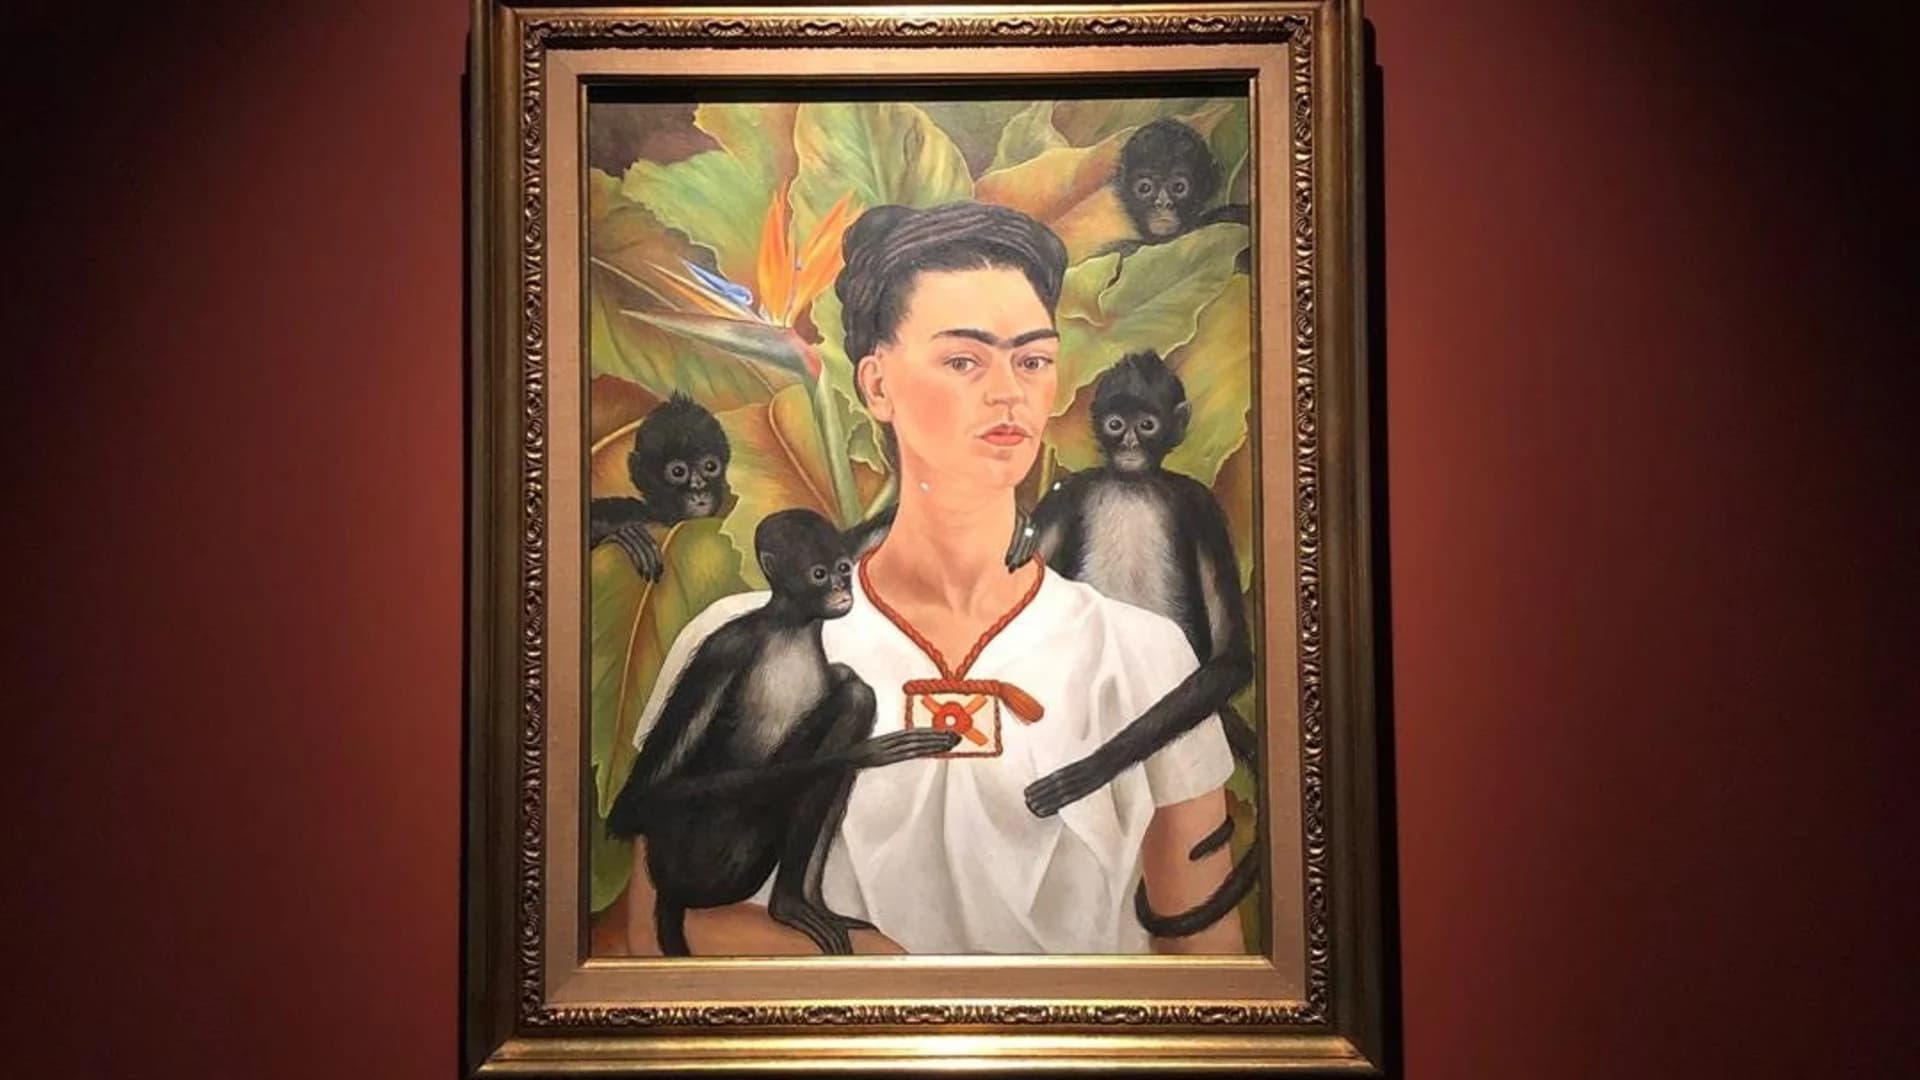 Frida Kahlo exhibit at the Brooklyn Museum